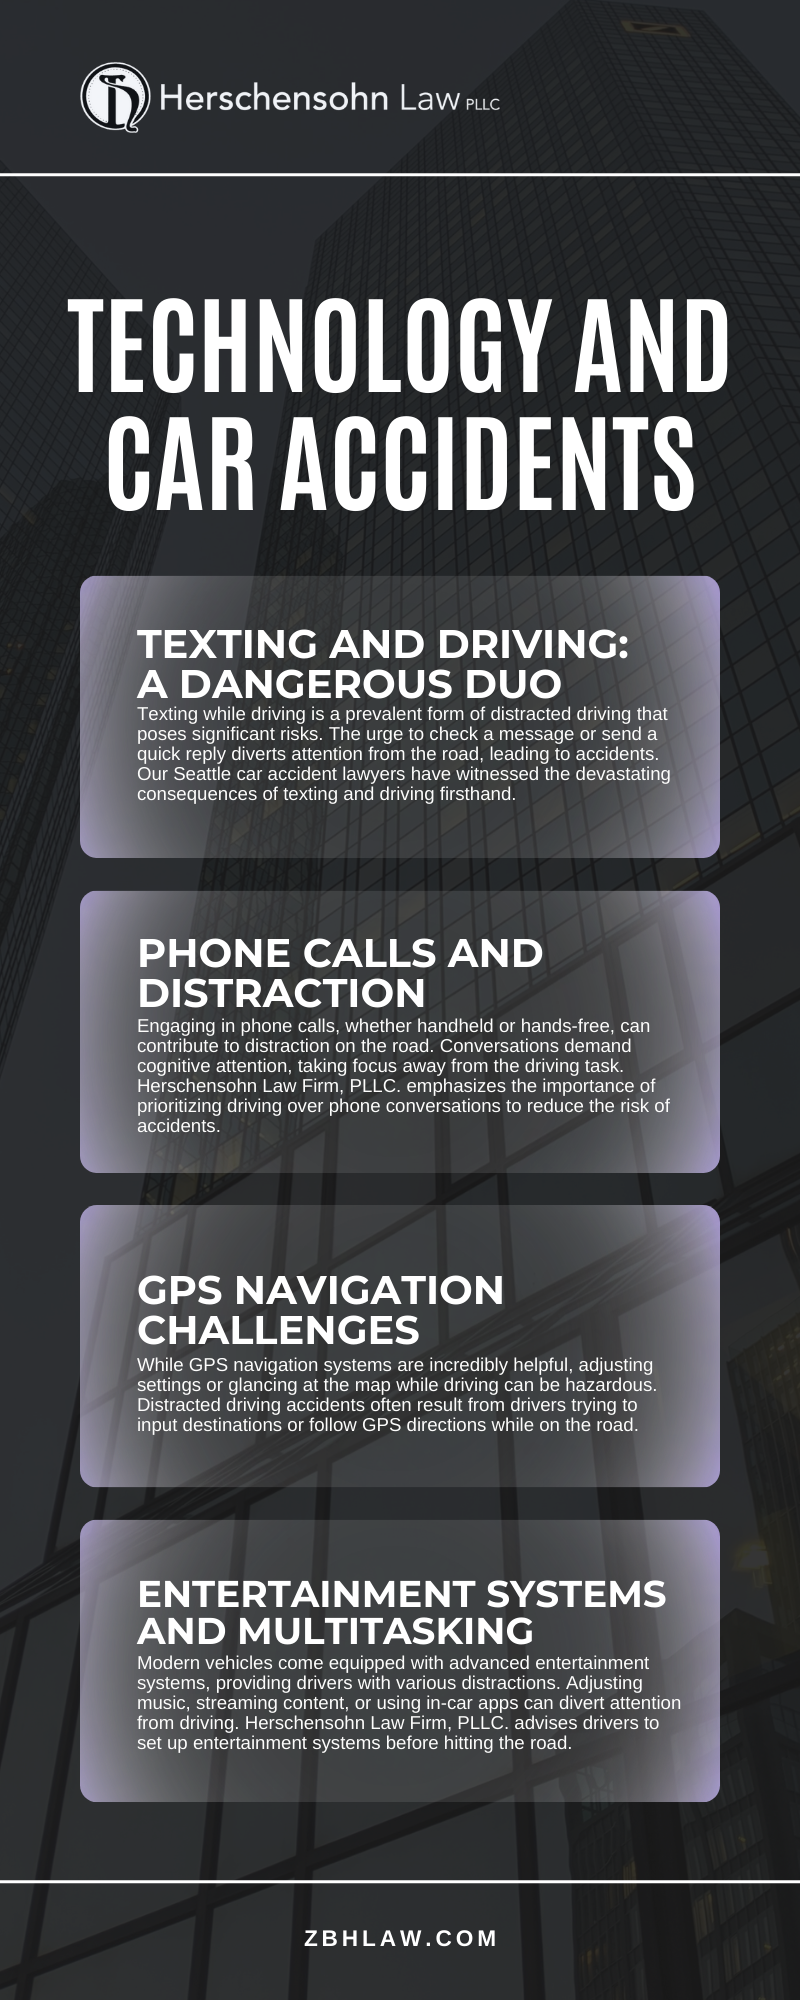 Technology And Car Accidents Infographic